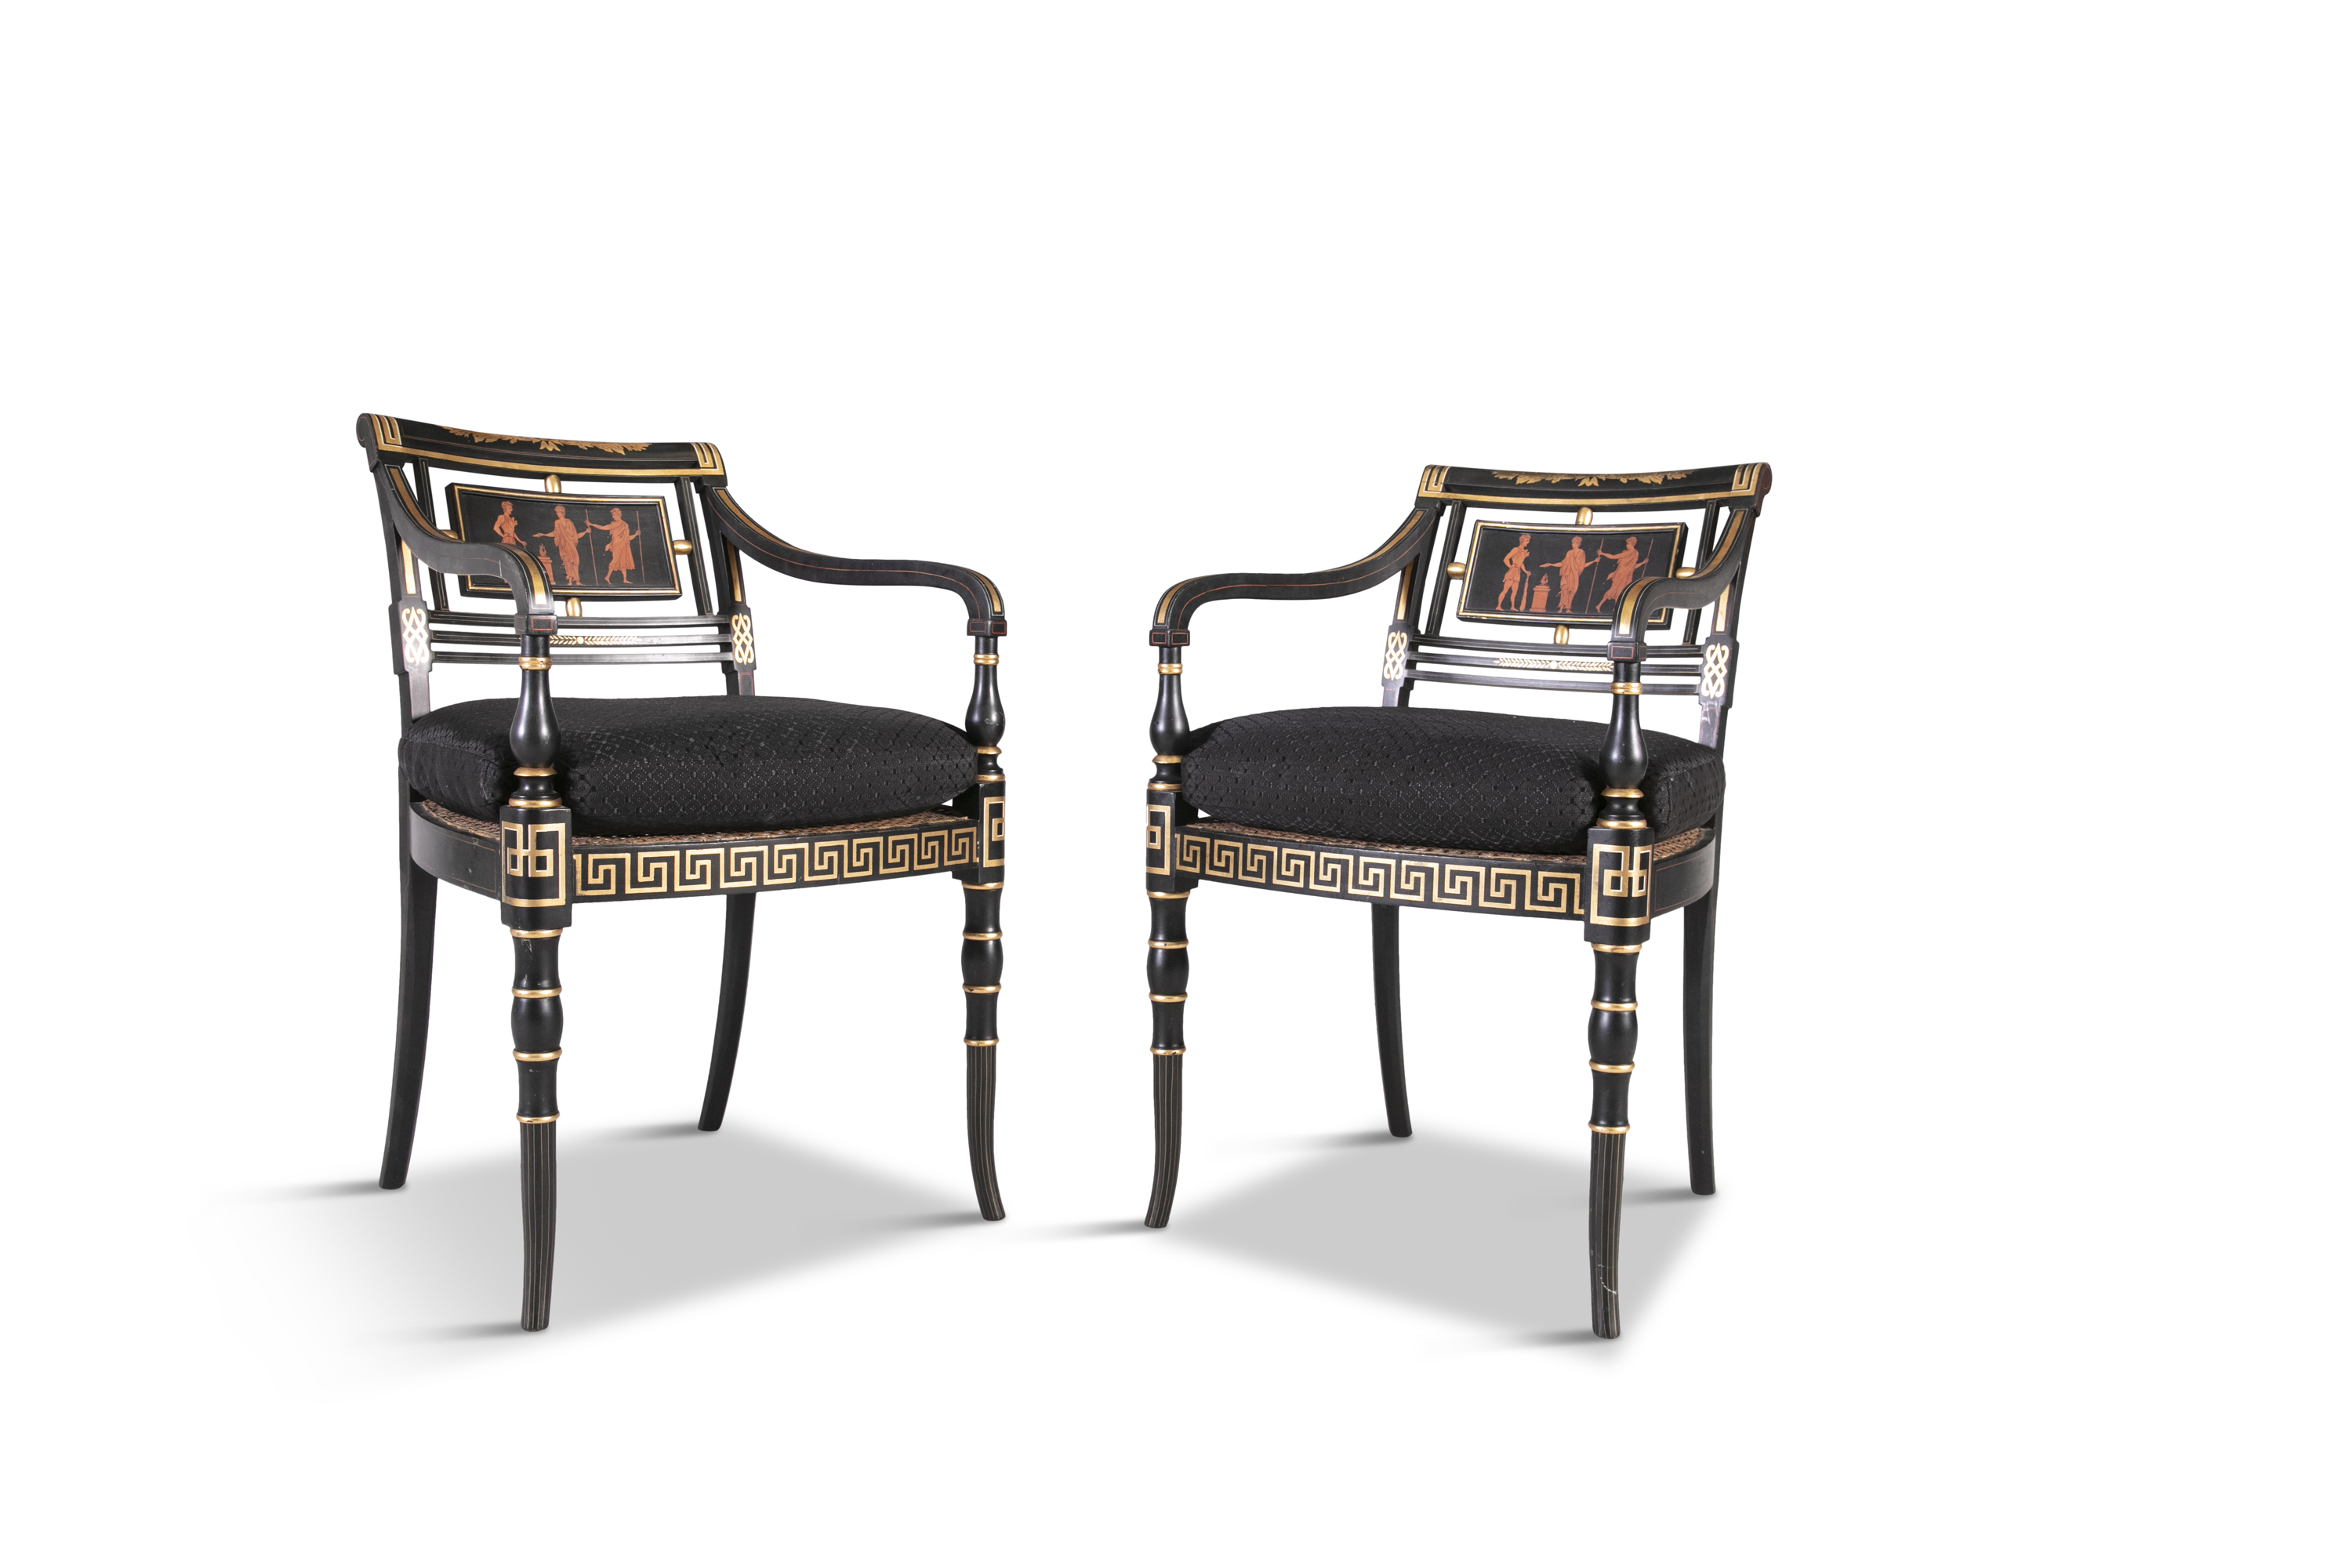 A PAIR OF REGENCY STYLE EBONISED AND PARCEL GILT OPEN ARMCHAIRS, the open backs with central